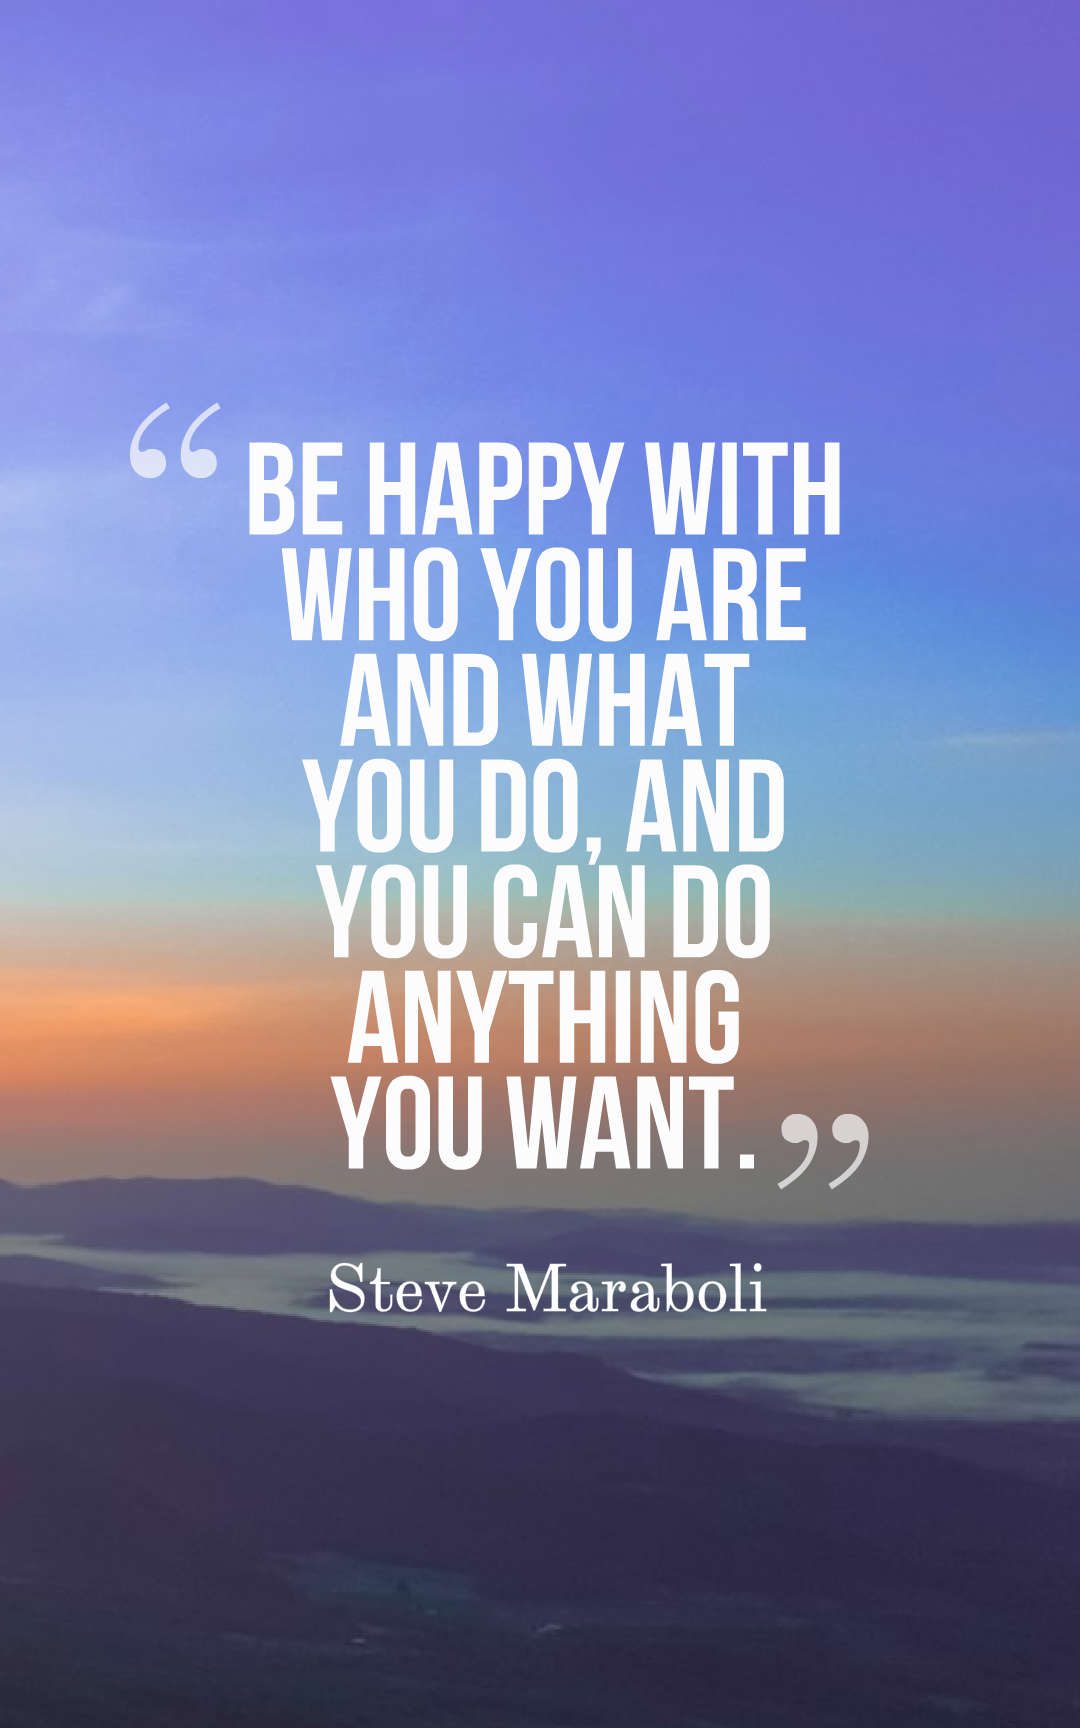 Be happy with who you are and what you do and you can do anything you want.